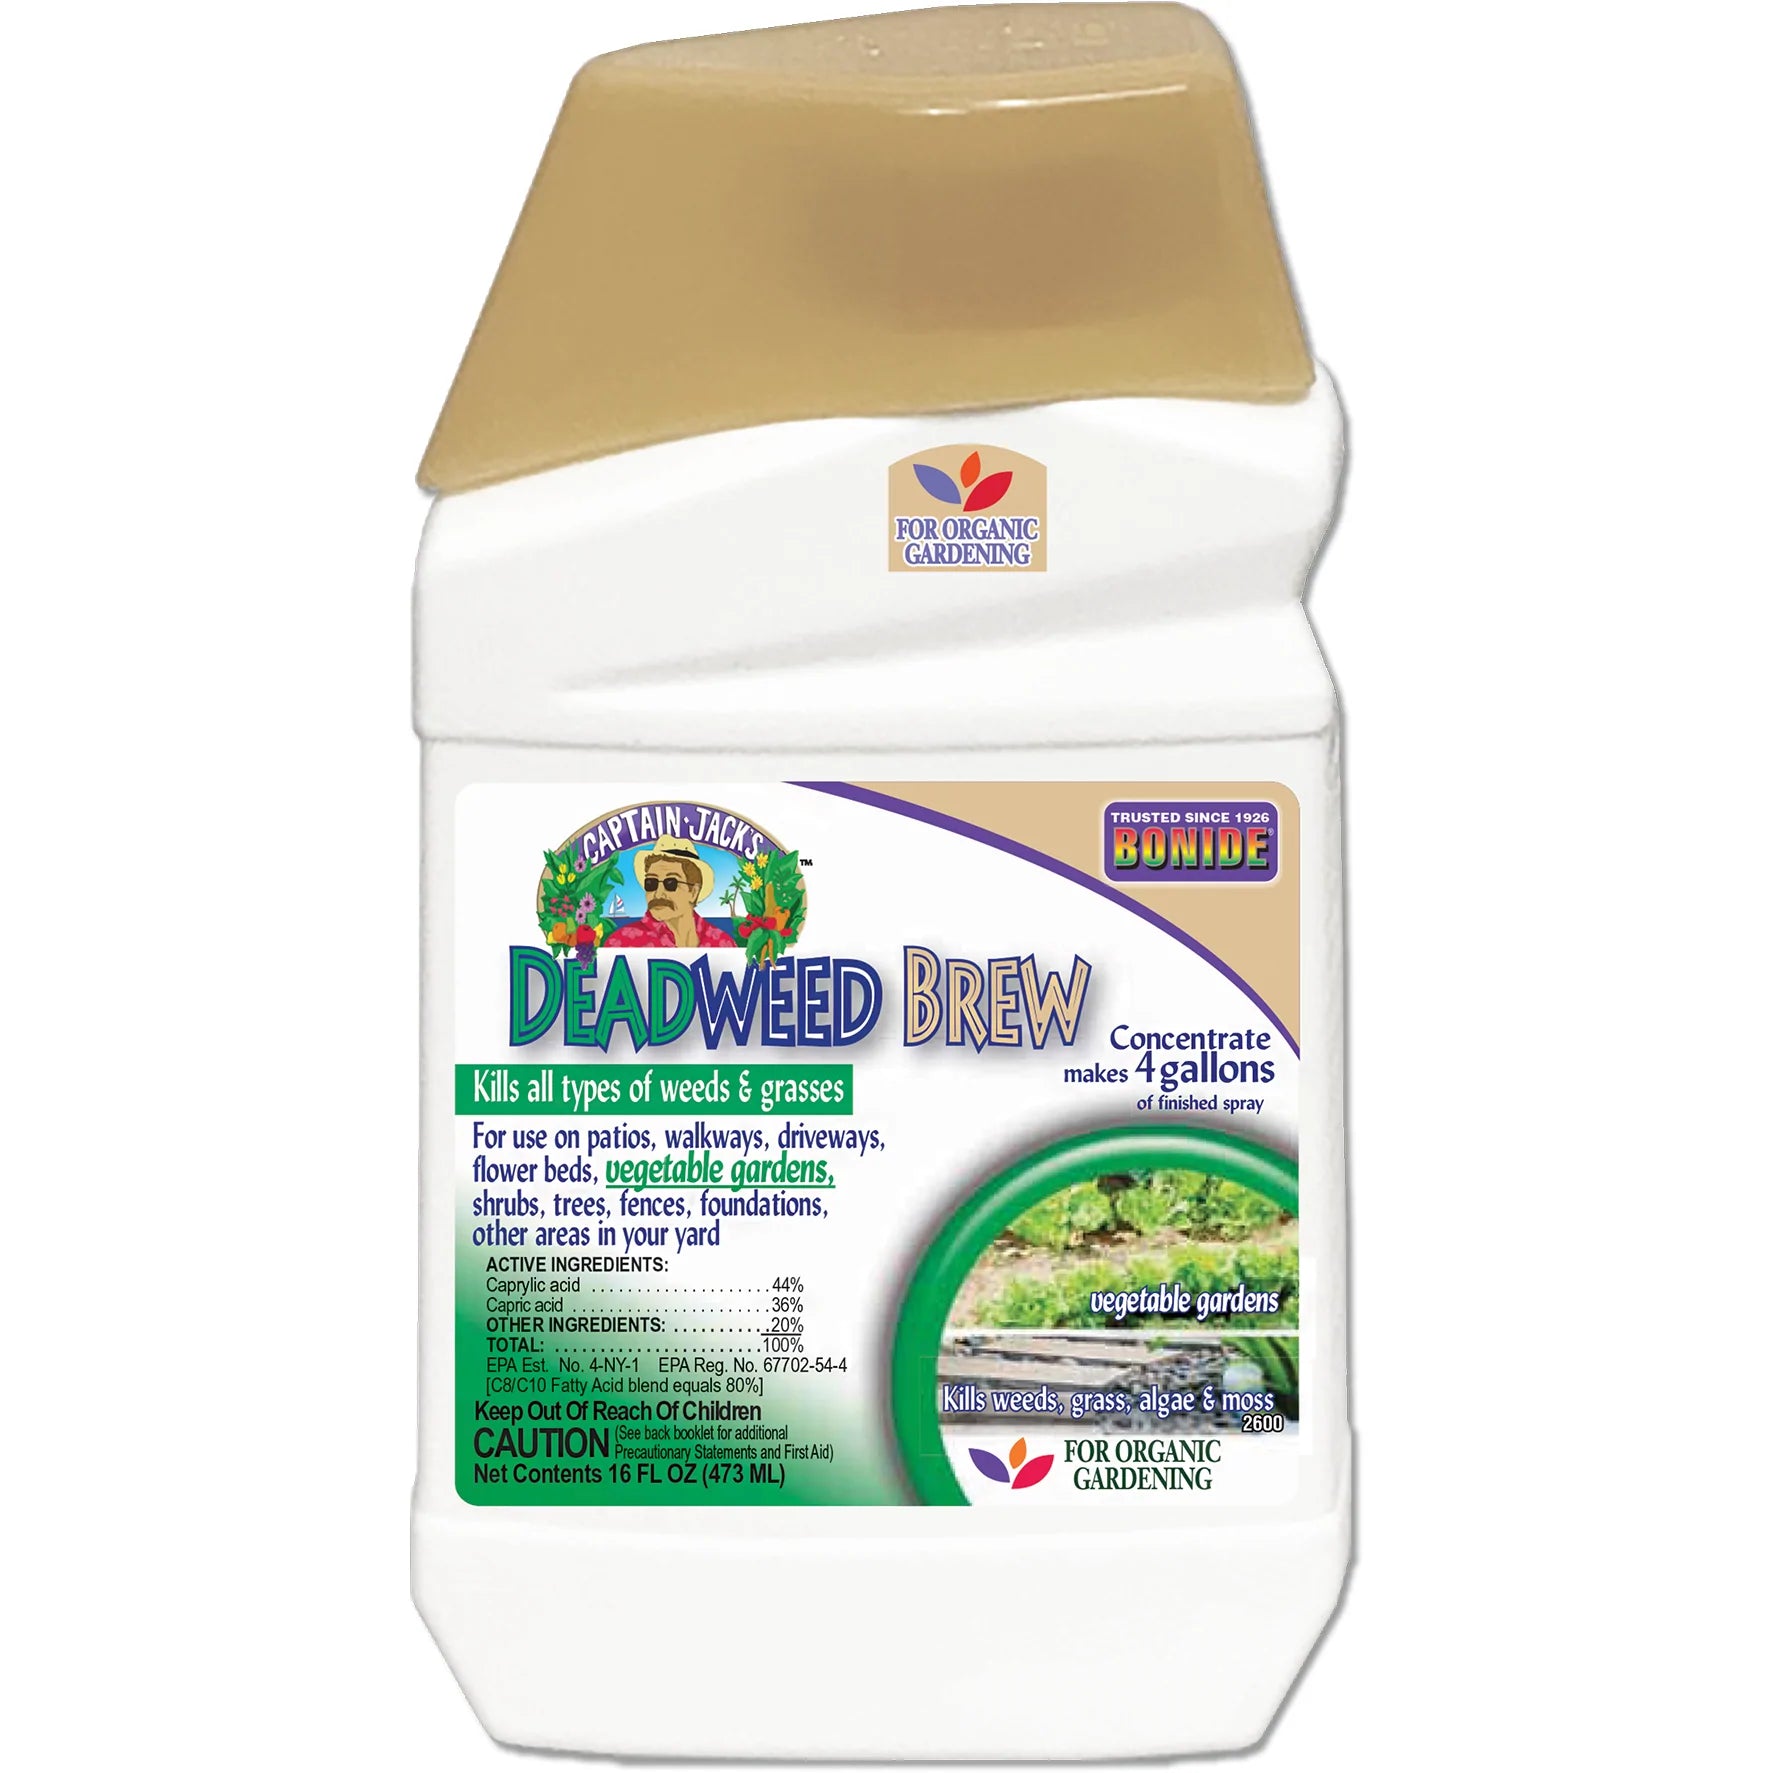 Captain Jack's Deadweed Non-Selective Weed Killer (Home Use) RMBA Bonide